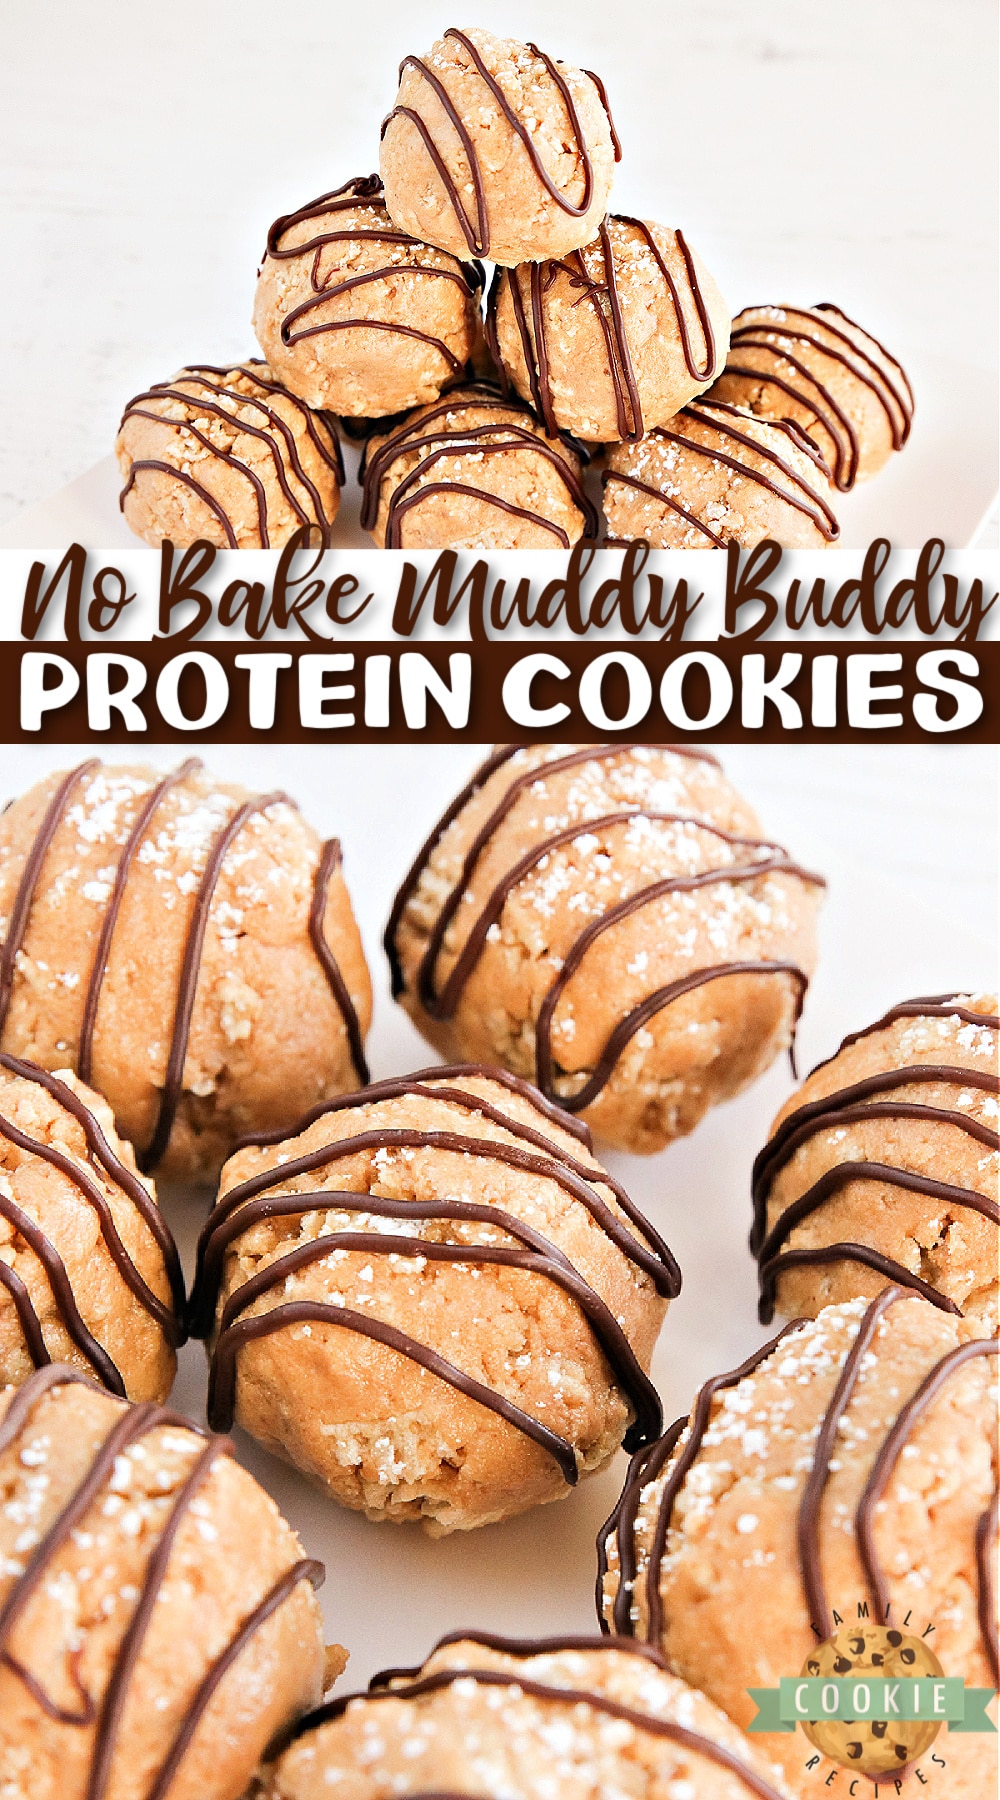 No Bake Muddy Buddy Protein Cookies are made with just 6 ingredients in less than 5 minutes. These delicious cookie have 6 grams of protein each!